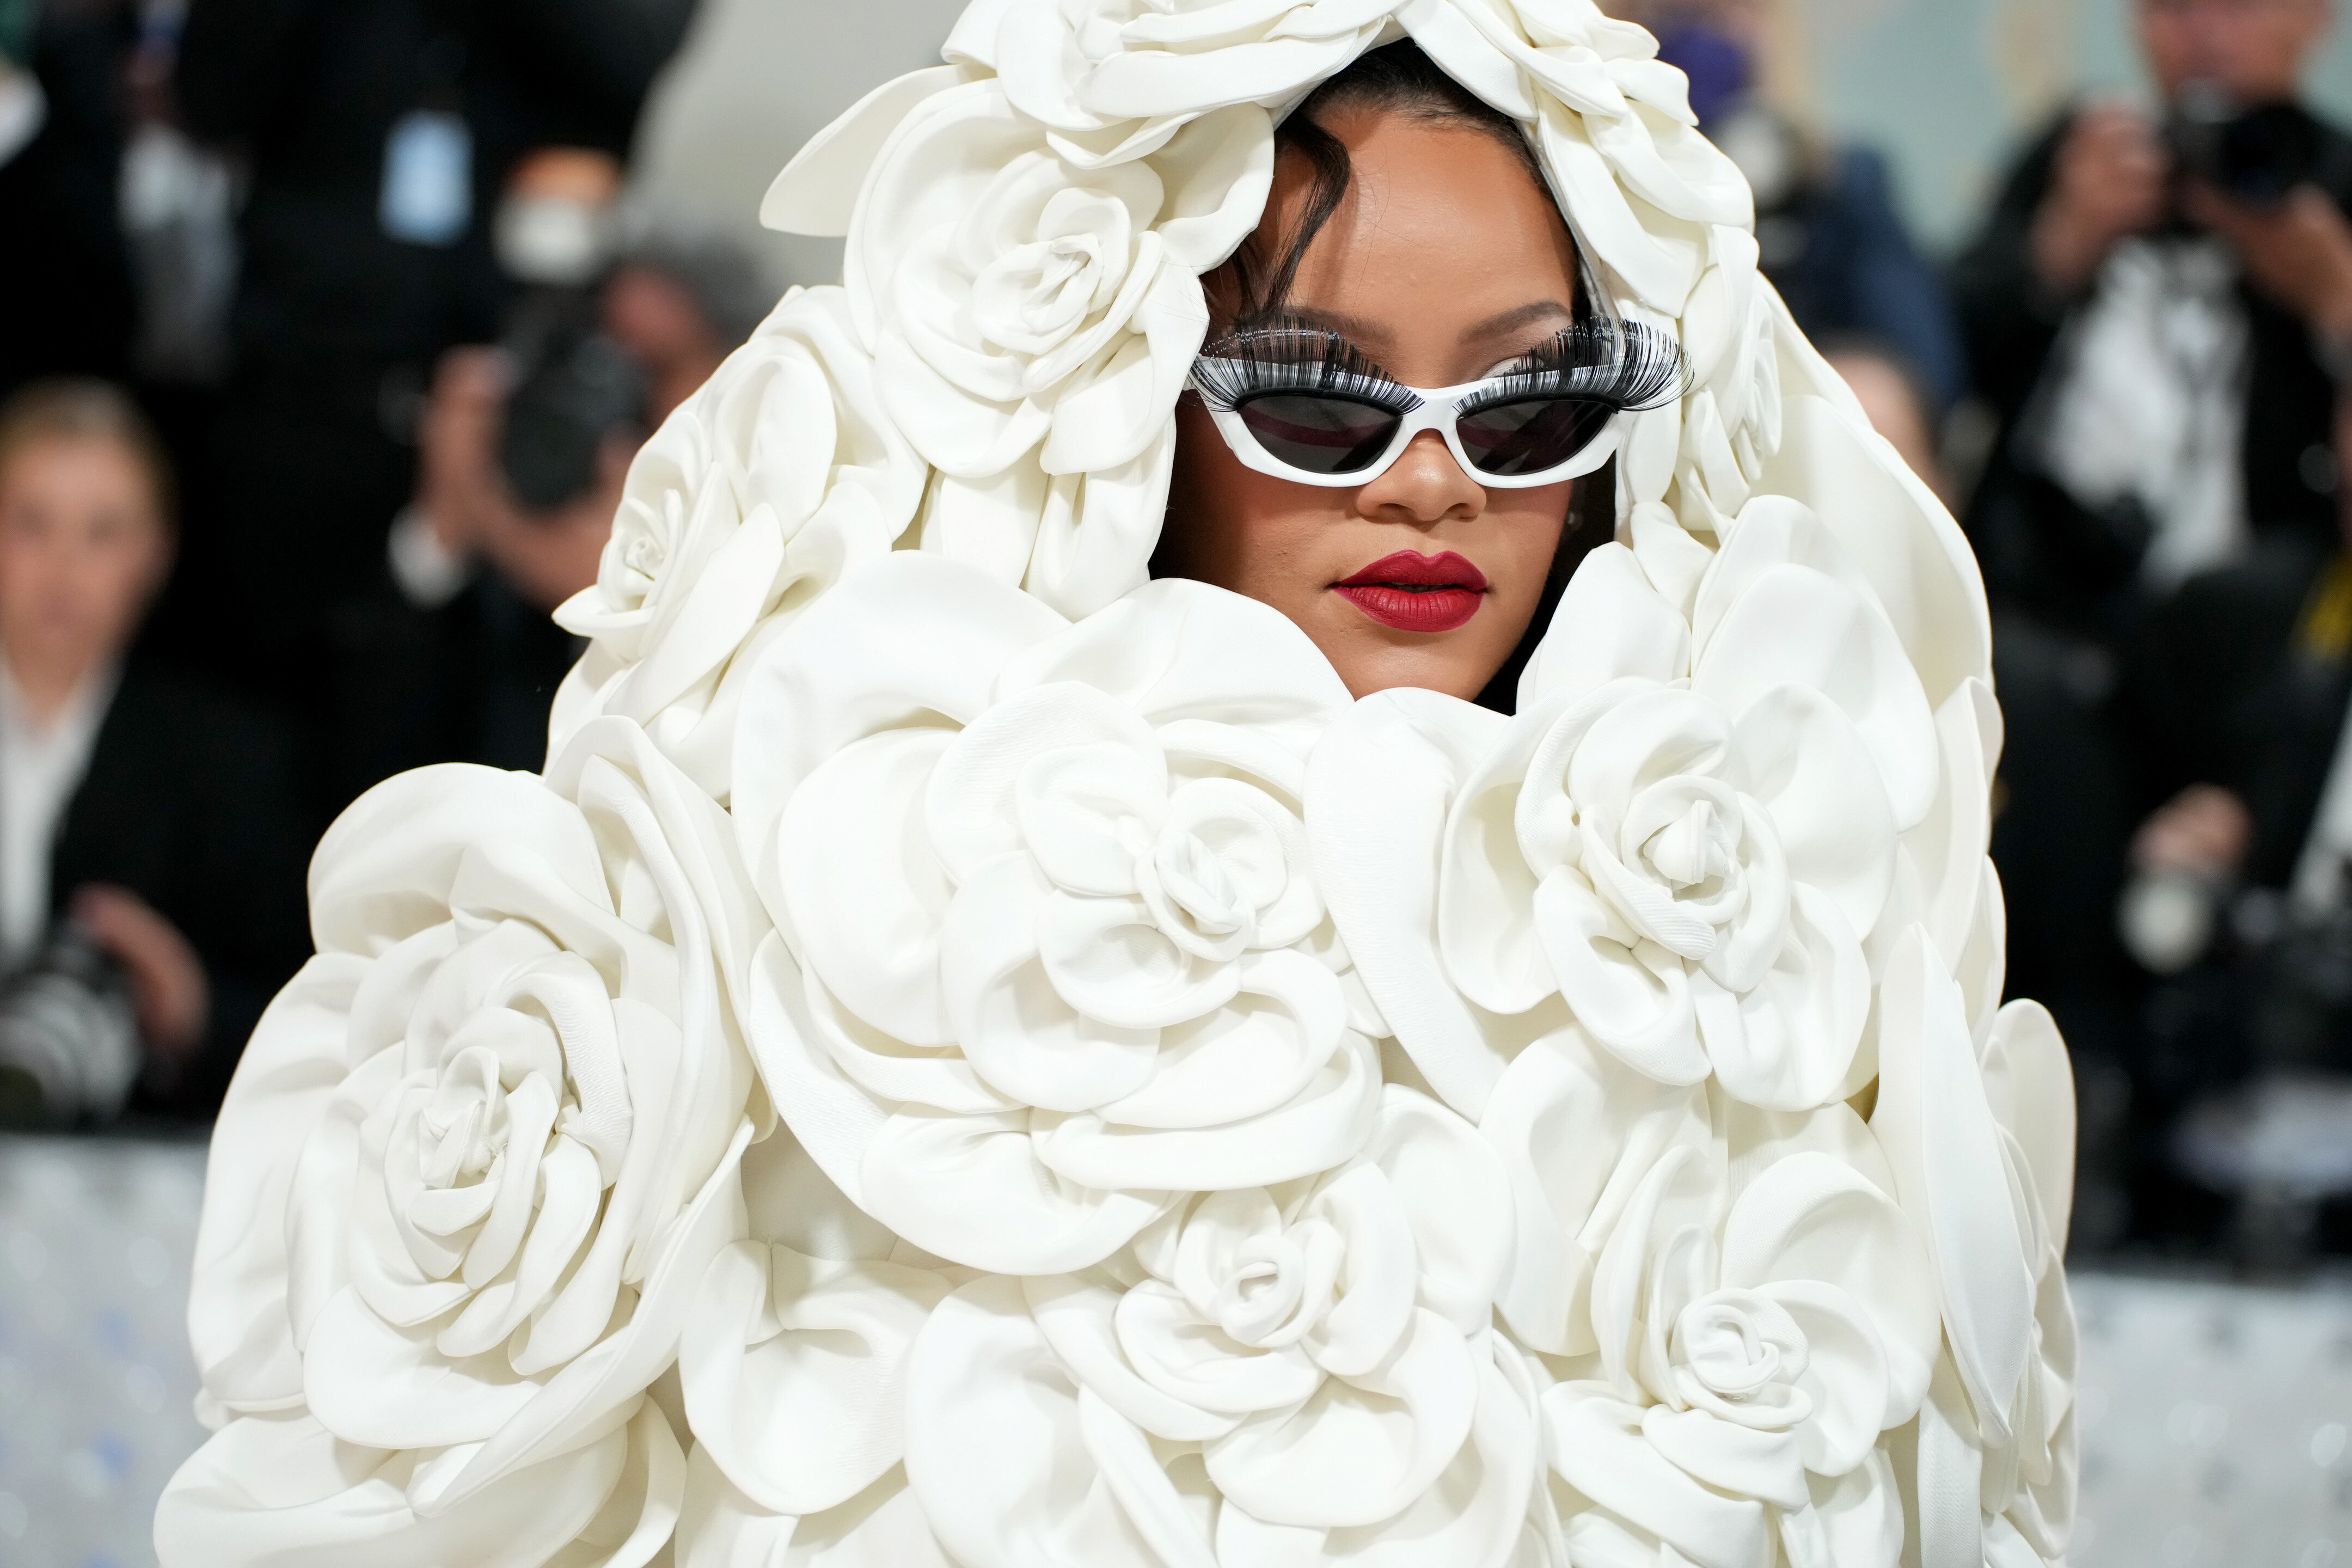 The Villain Of This Year's Met Gala' The Flu.